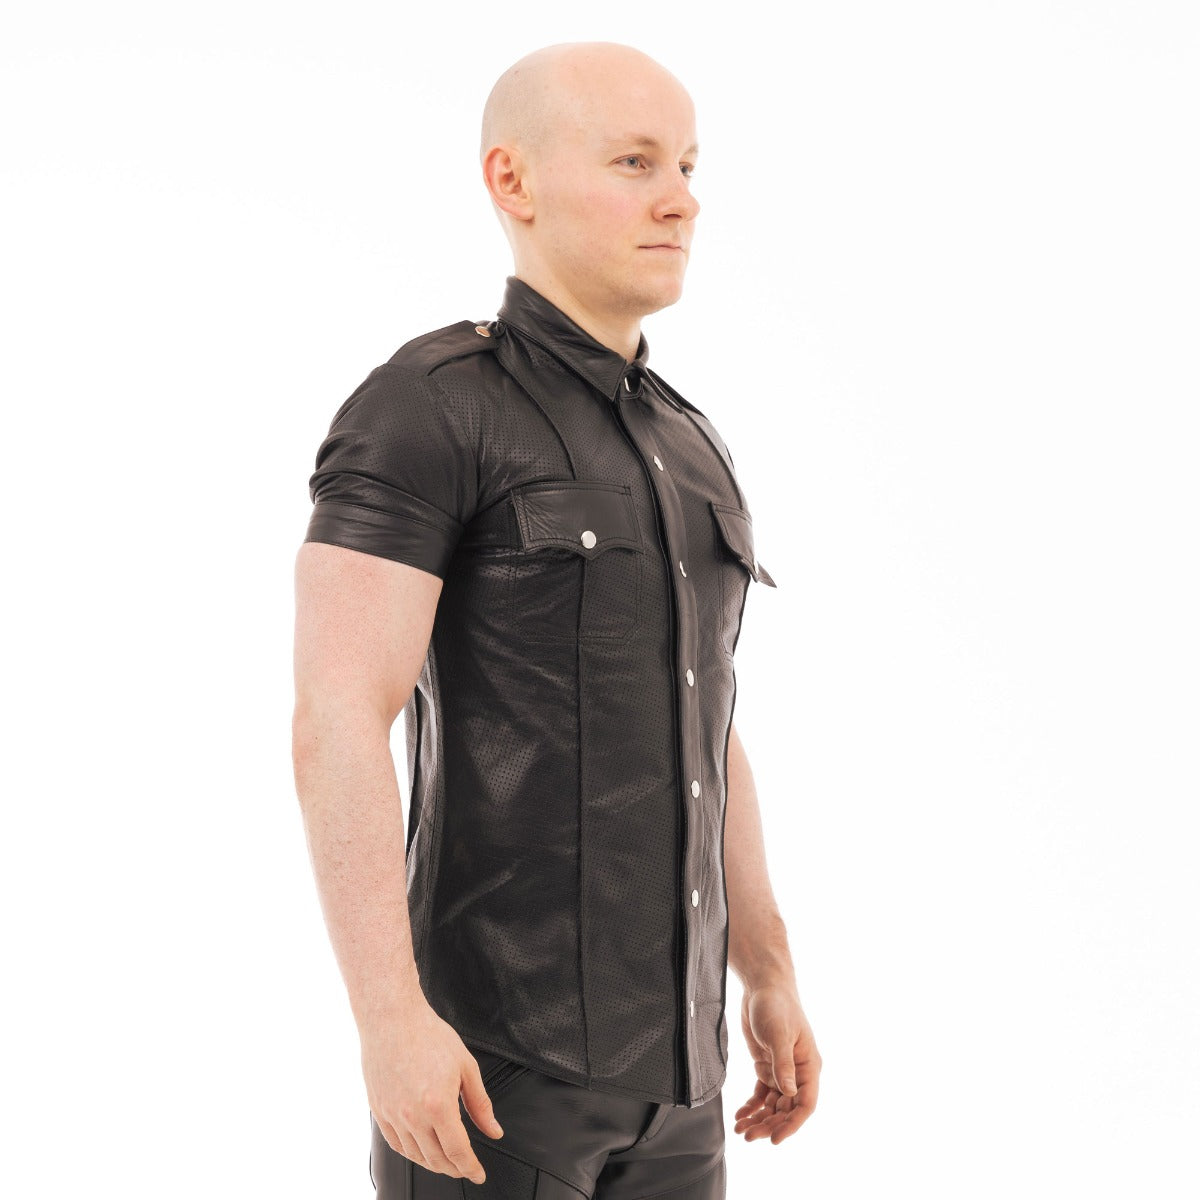 Fetish Wear - Shirts Prowler RED Punch Hole Shirt Small   